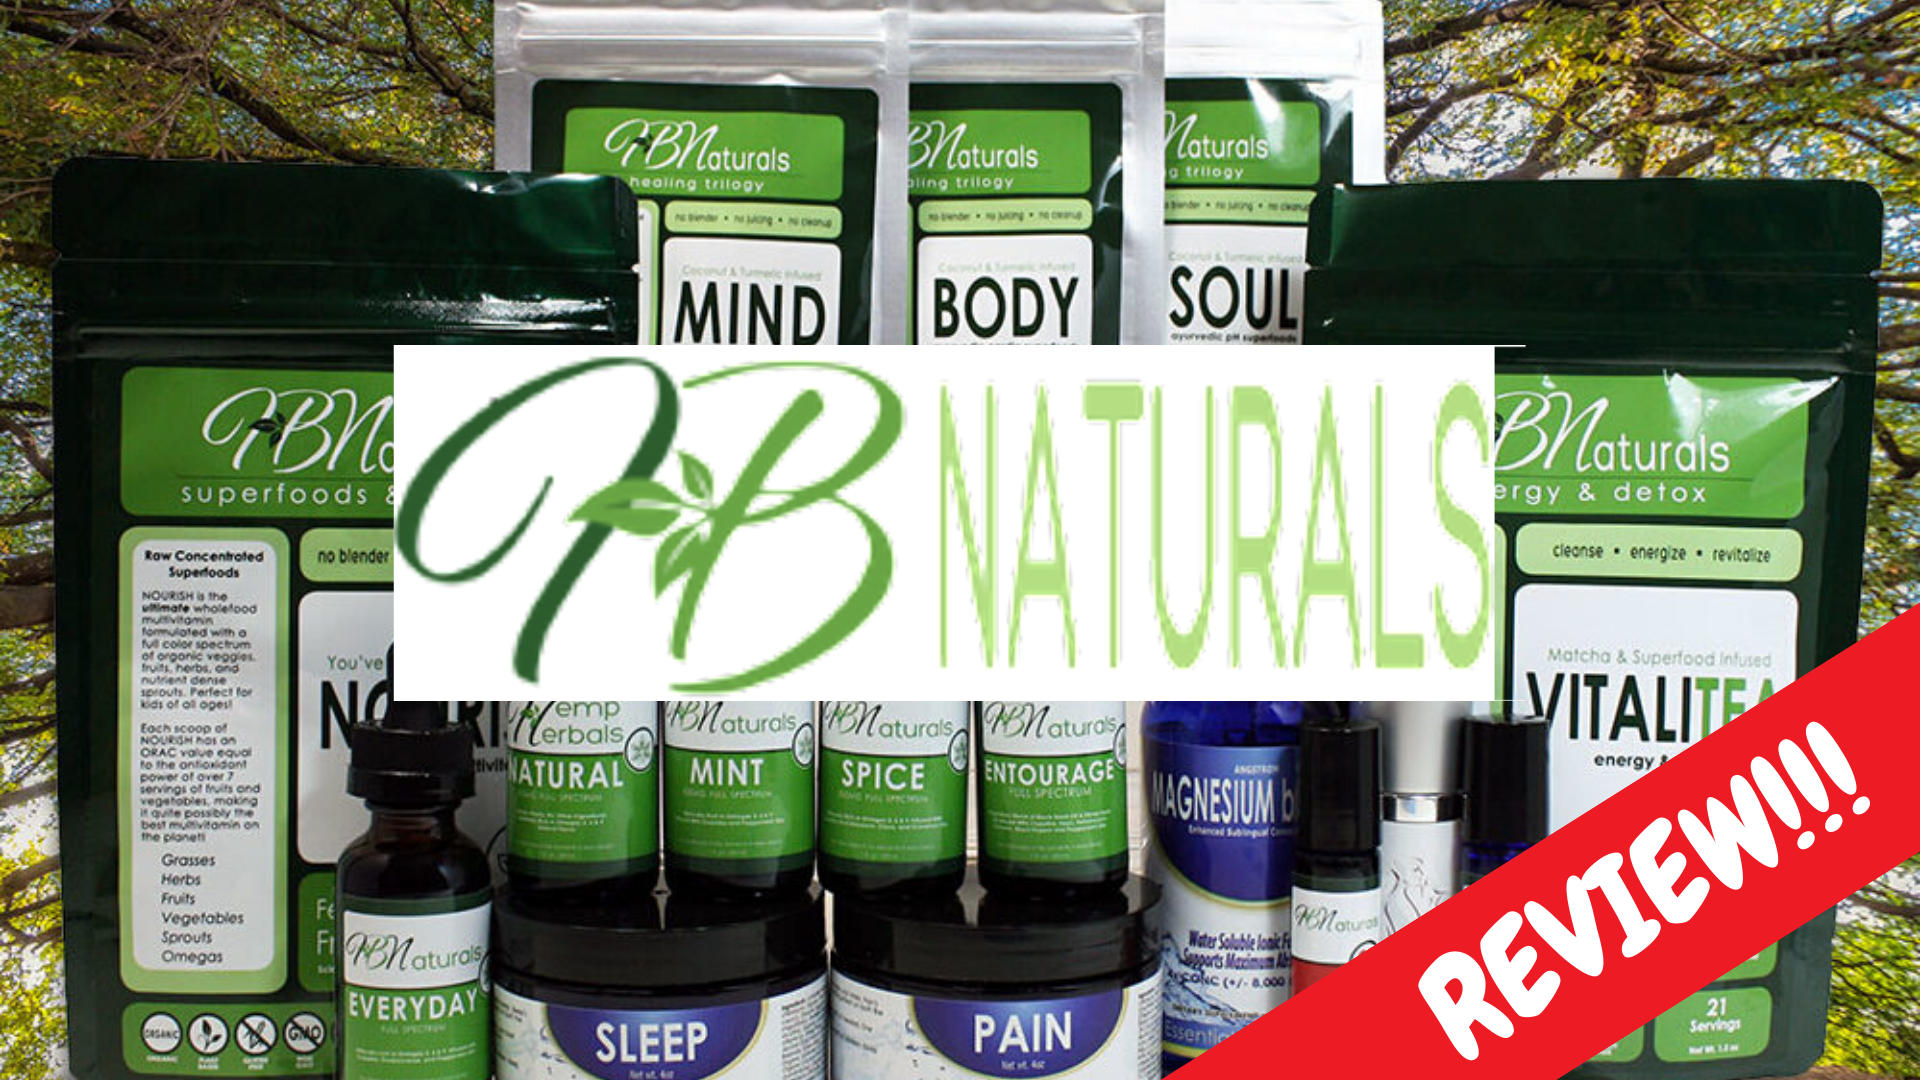 Is HB Naturals a scam